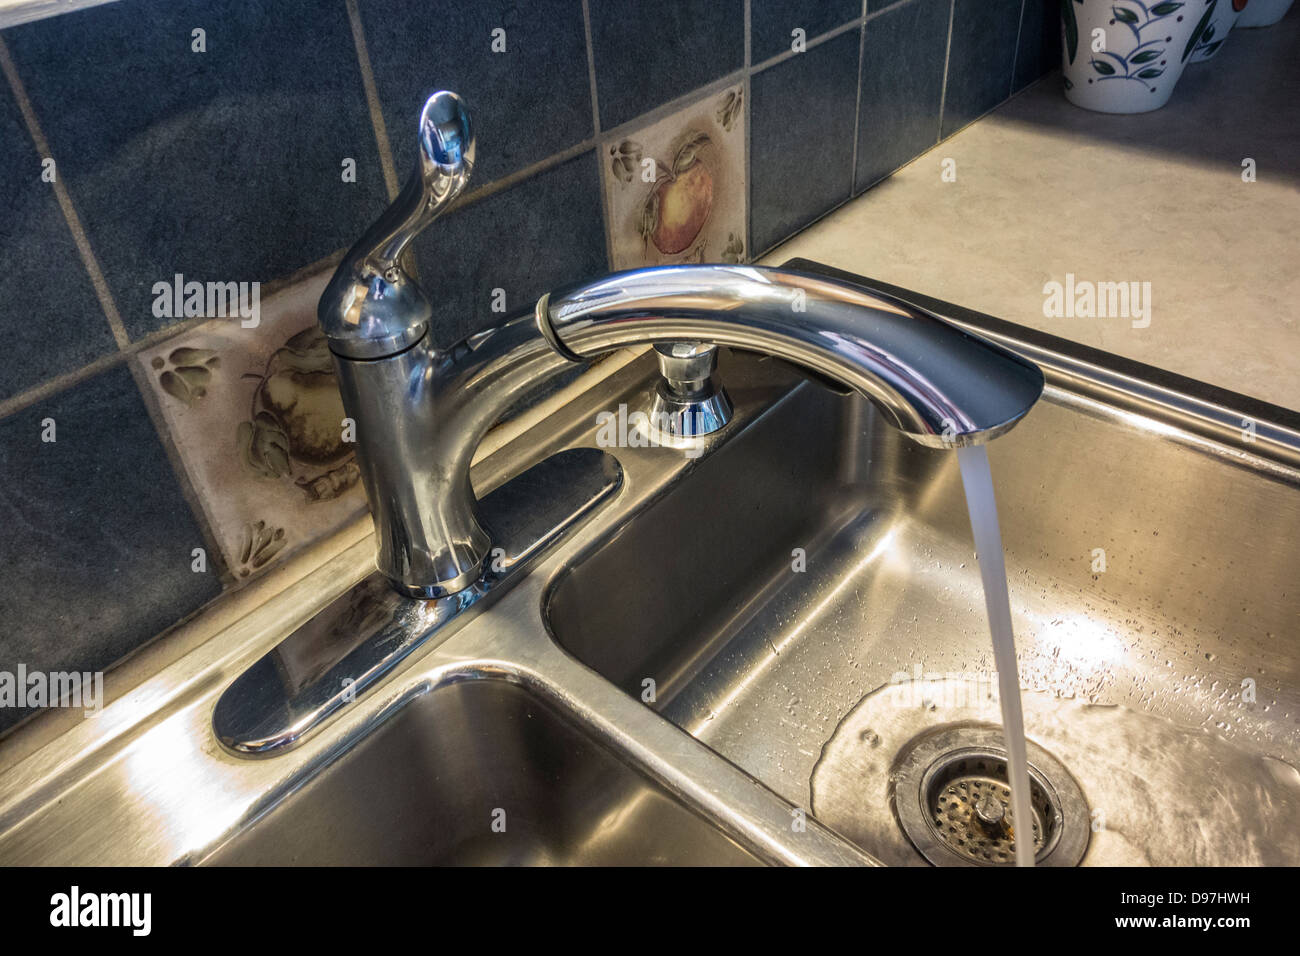 Kitchen faucet with running water into stainless steel double sinks. Closeup. USA. Stock Photo